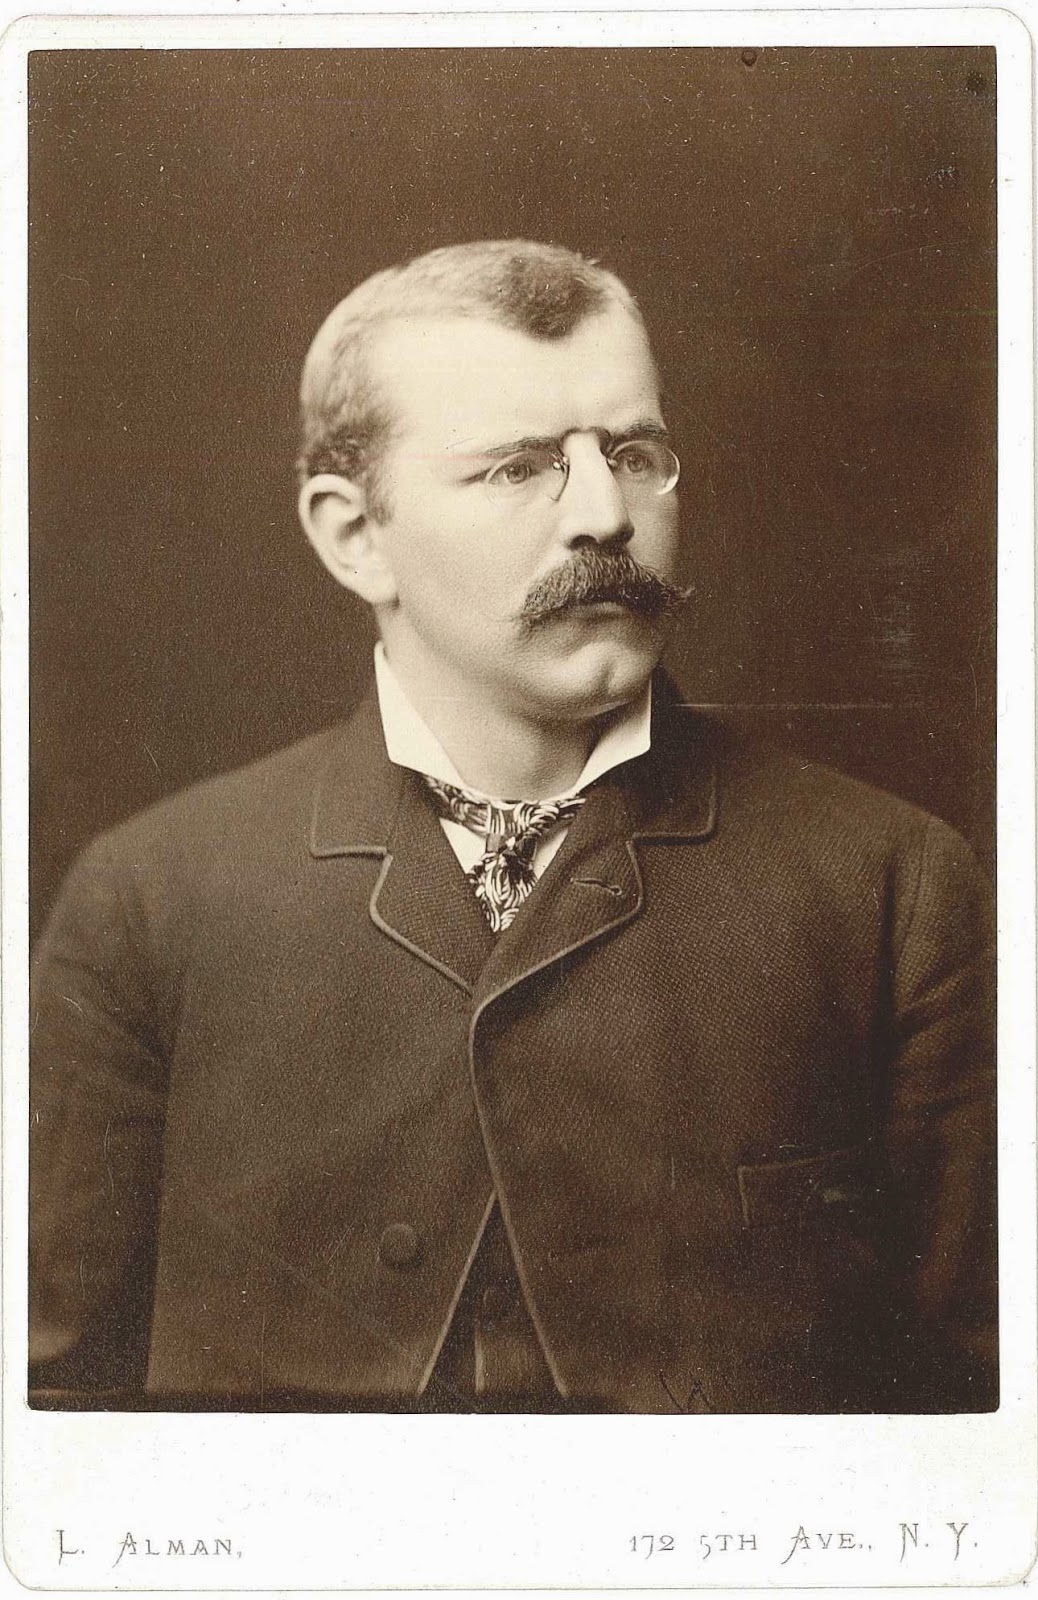 A black and white photograph of a man with a mustache and glasses.